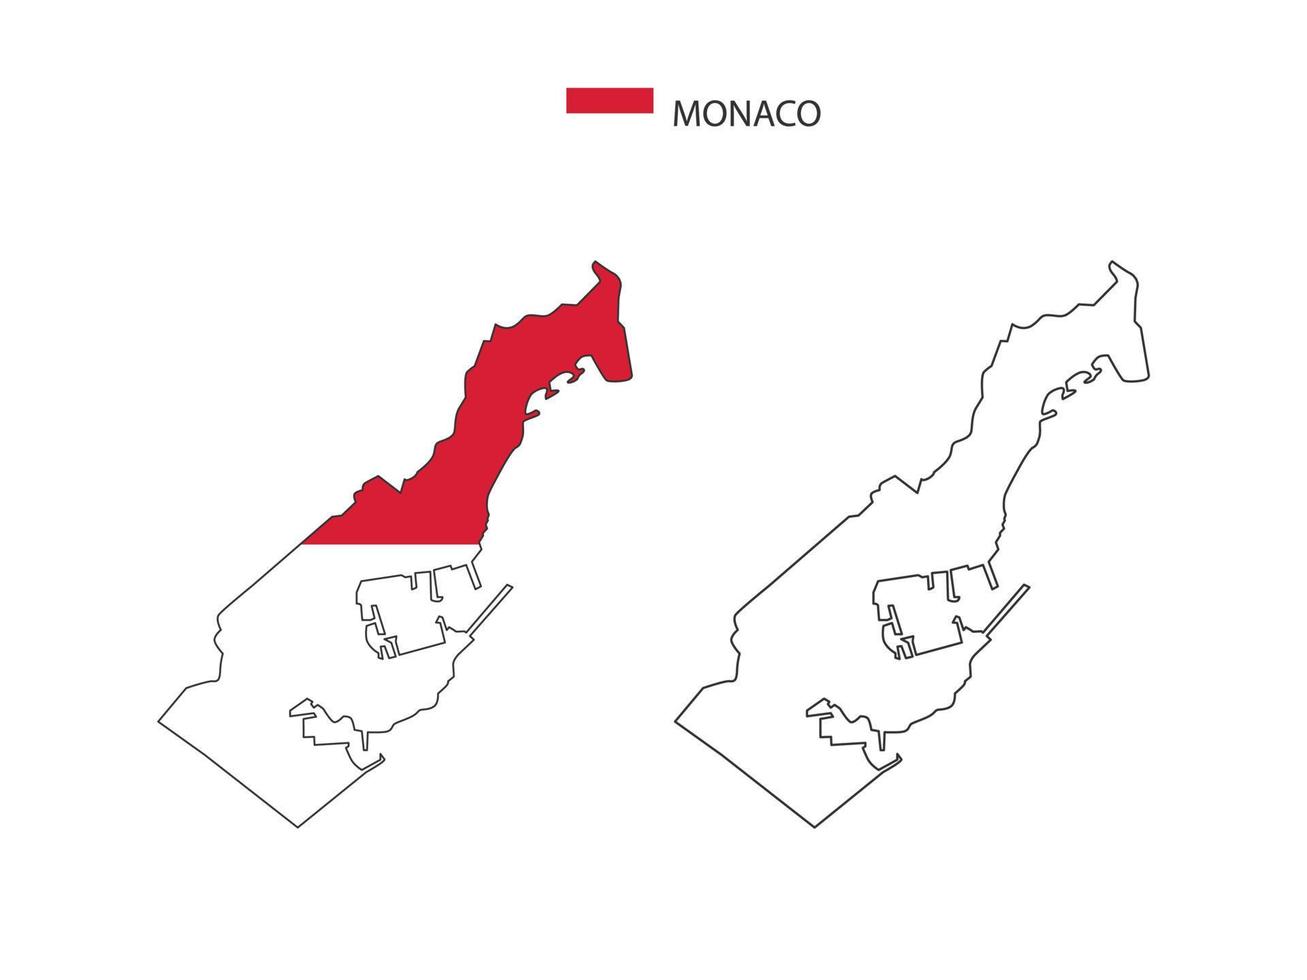 Monaco map city vector divided by outline simplicity style. Have 2 versions, black thin line version and color of country flag version. Both map were on the white background.